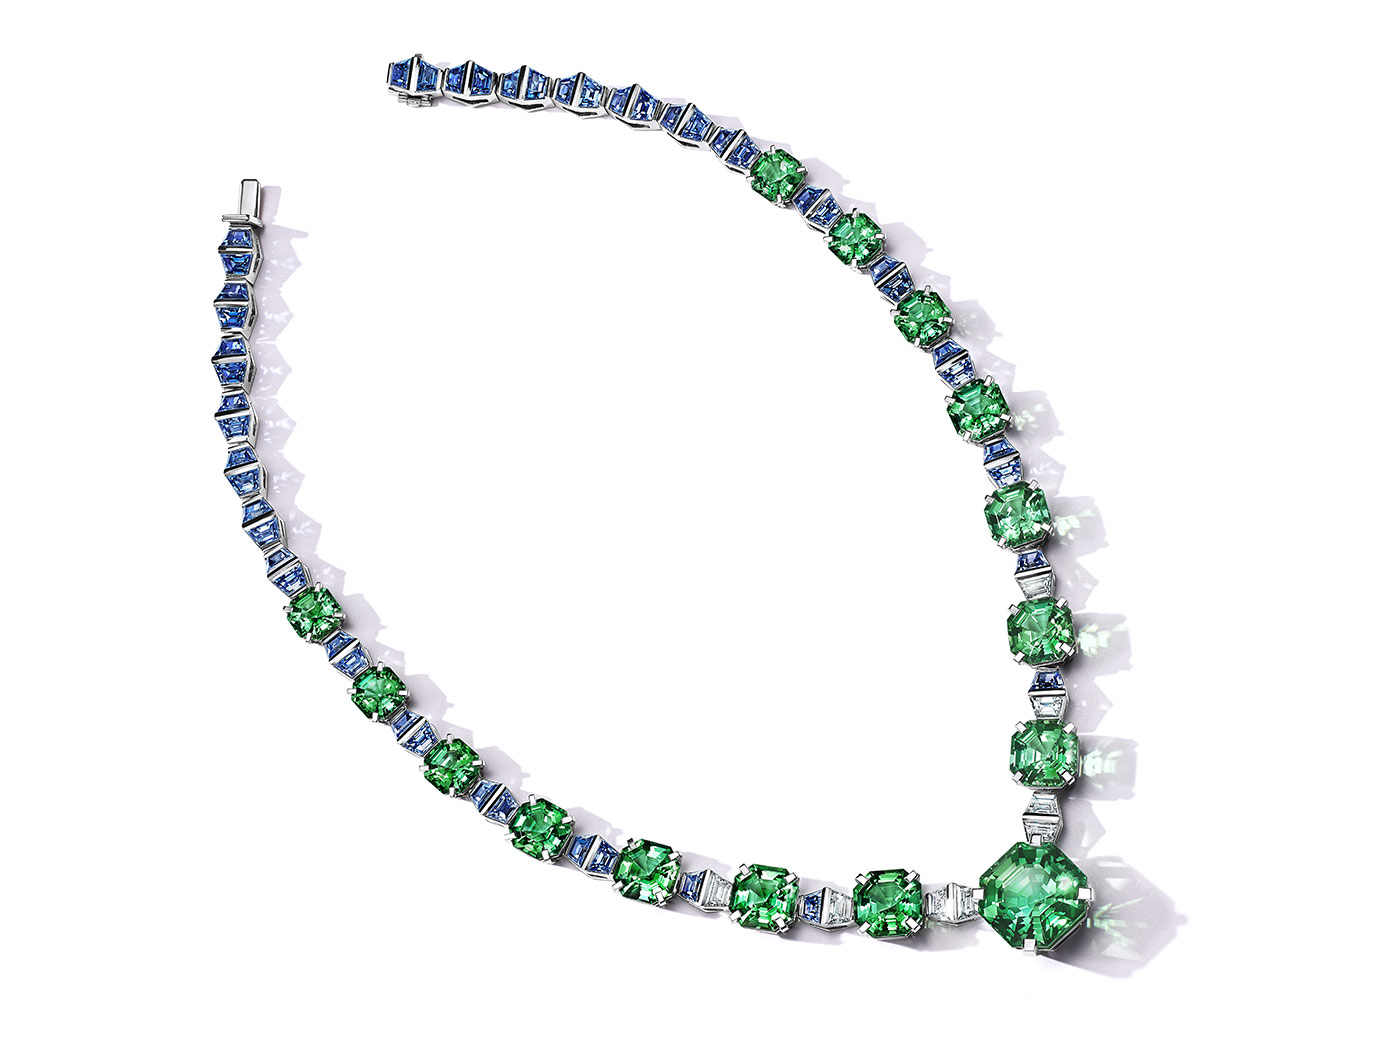 Tiffany & Co. Sea necklace from the Colors of Nature High Jewellery Collection crafted in platinum with more than 77 carats of emerald-cut green tourmalines, custom-cut sapphires of 29 carats and trapezoid diamonds